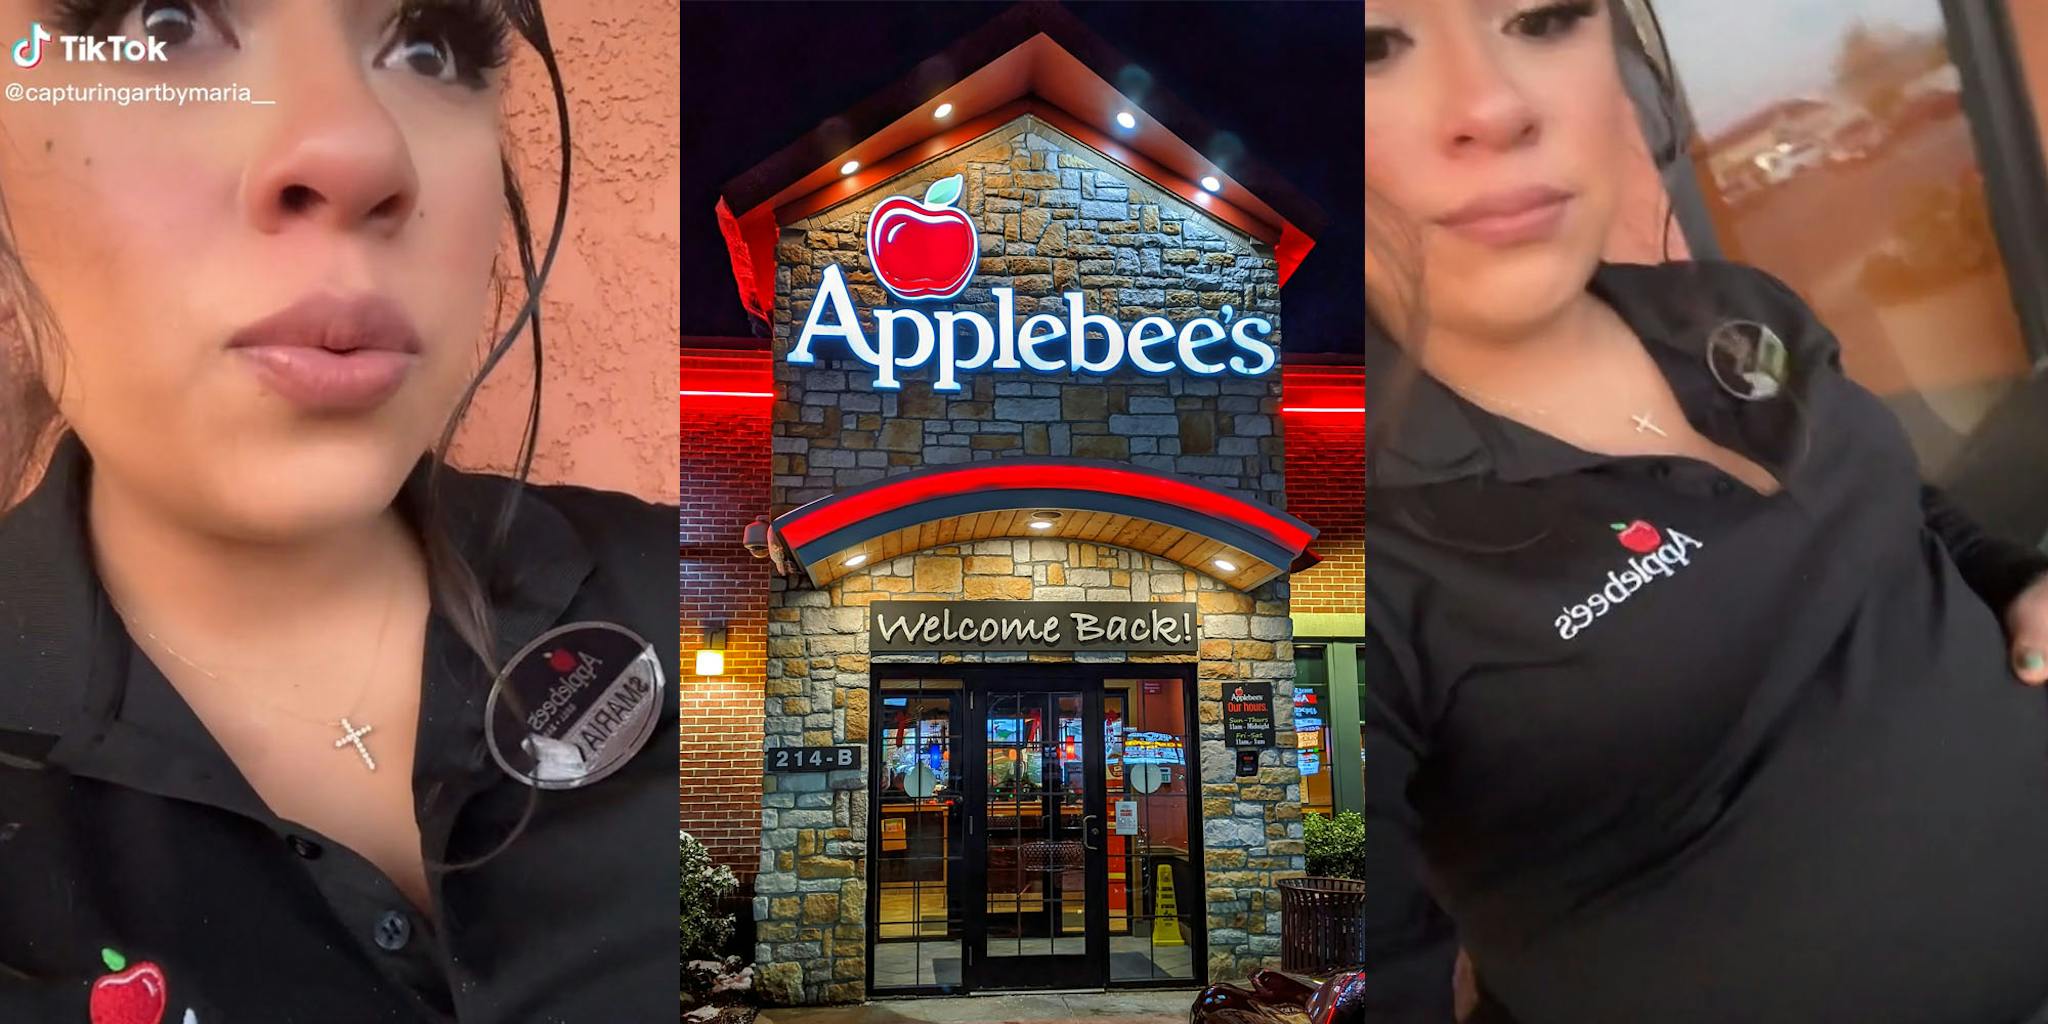 Pregnant Applebee’s worker cries after manager allegedly fat-shames her